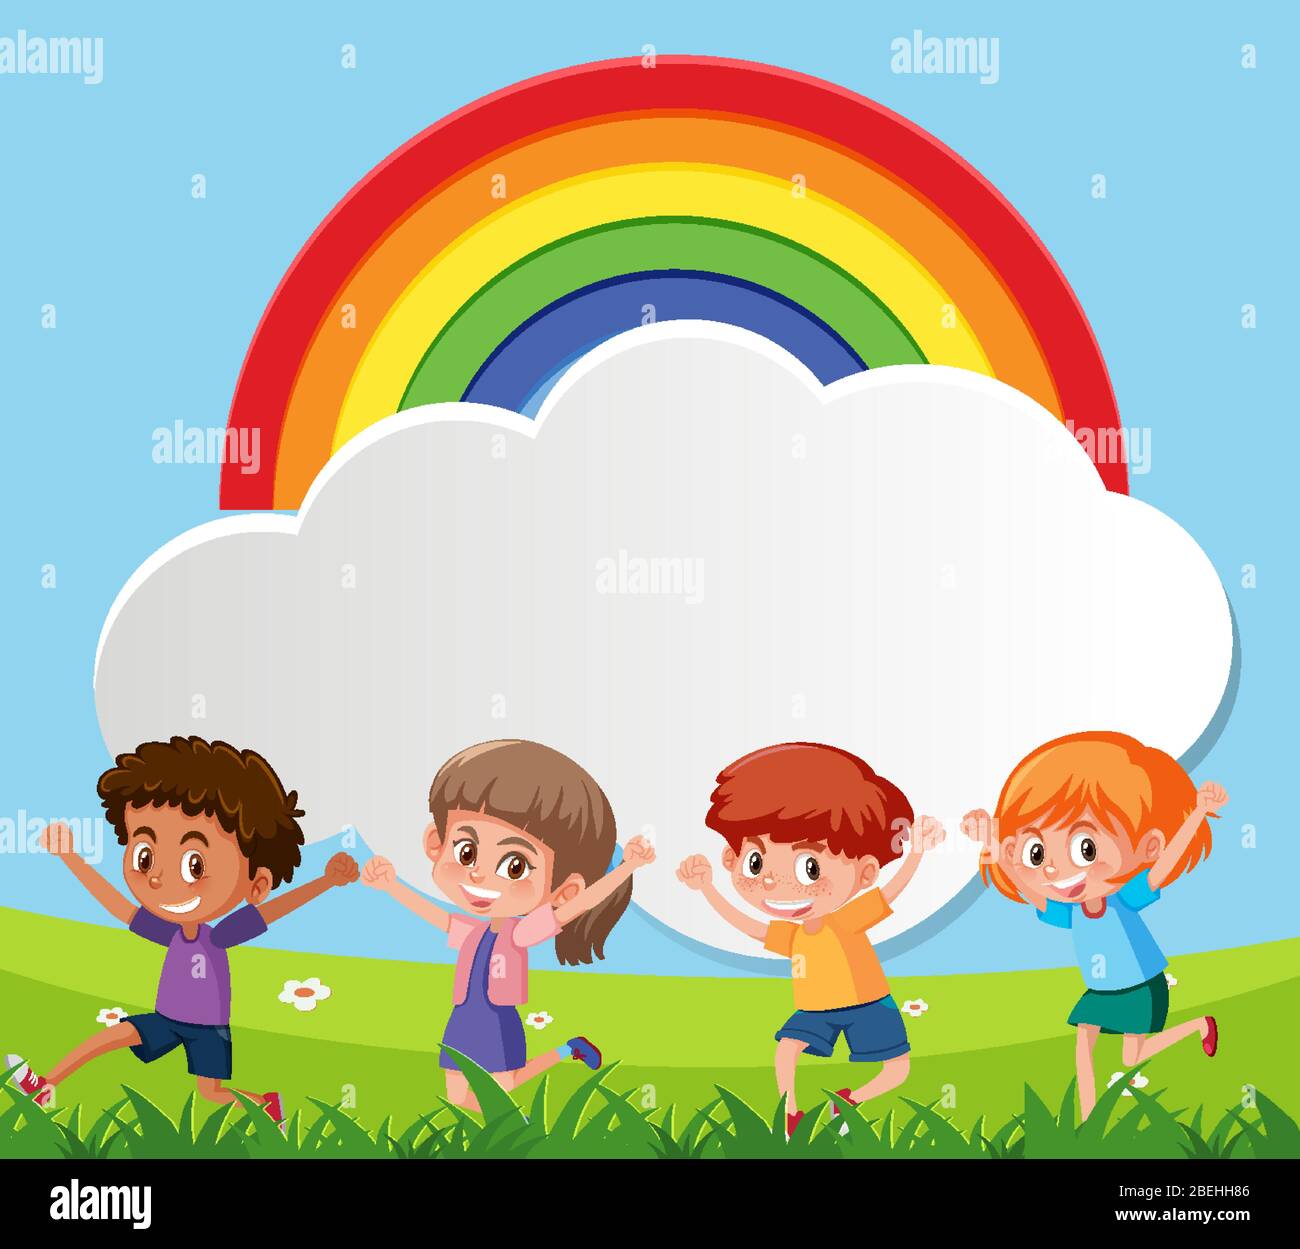 Border template design with many children in background illustration Stock  Vector Image & Art - Alamy